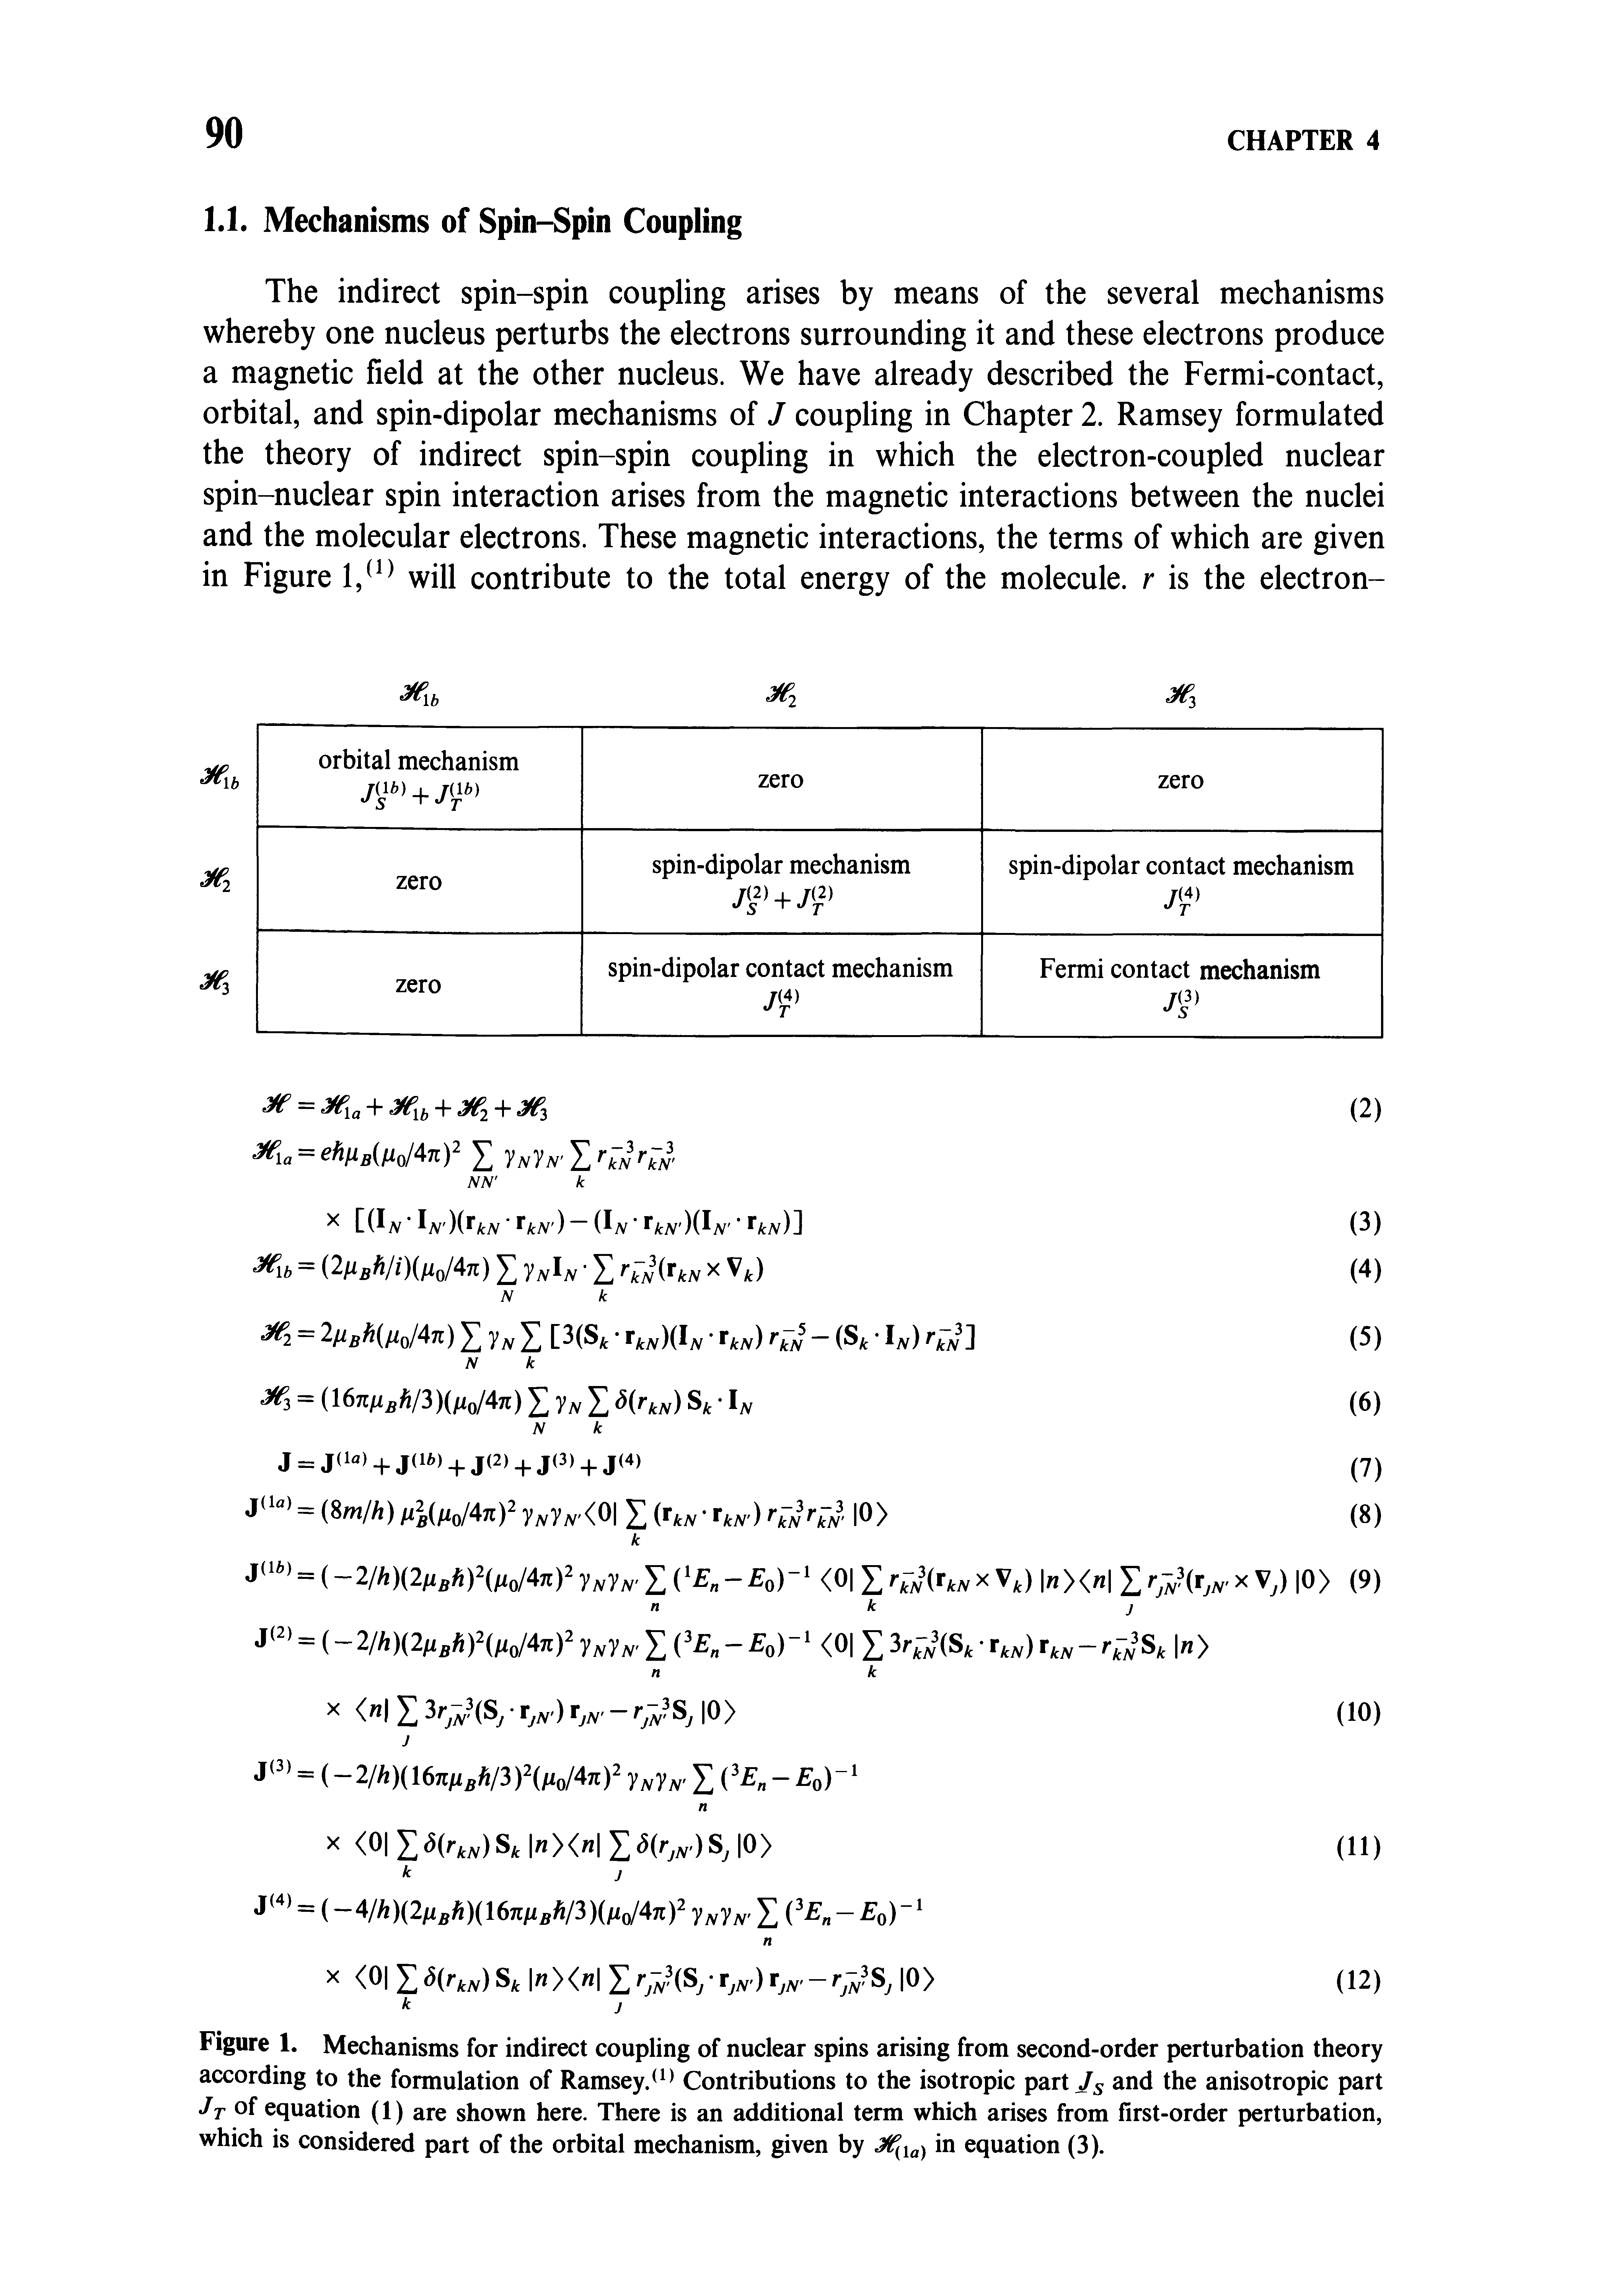 Figure 1. Mechanisms for indirect coupling of nuclear spins arising from second-order perturbation theory according to the formulation of Ramsey/Contributions to the isotropic part Js and the anisotropic part /r of equation (1) are shown here. There is an additional term which arises from first-order perturbation, w ich is considered part of the orbital mechanism, given by equation (3).